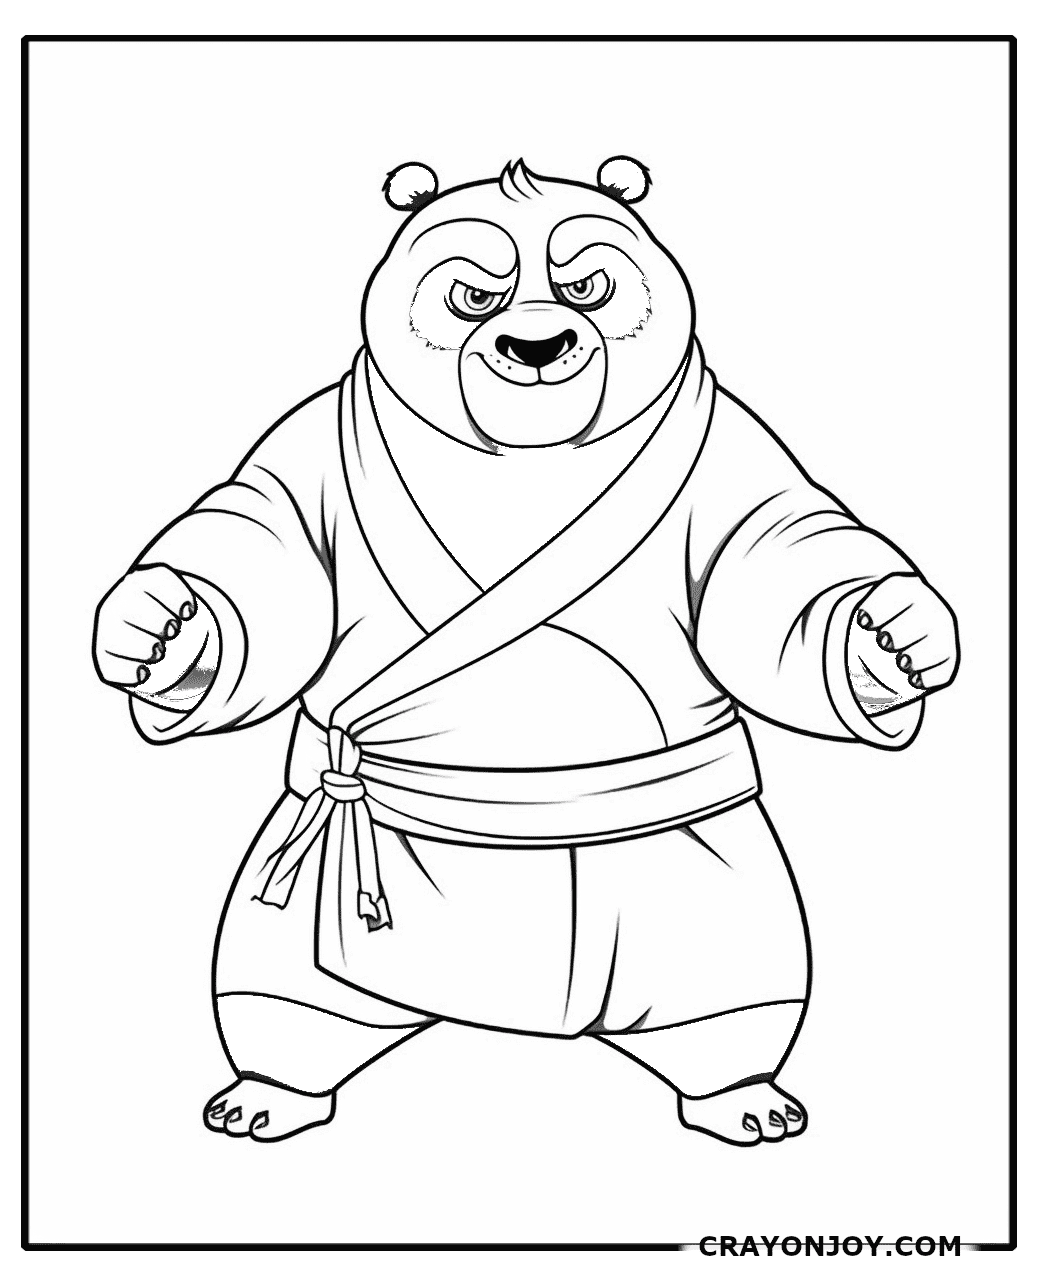 Free Printable Kung Fu Panda Coloring Pages for Kids and Adults